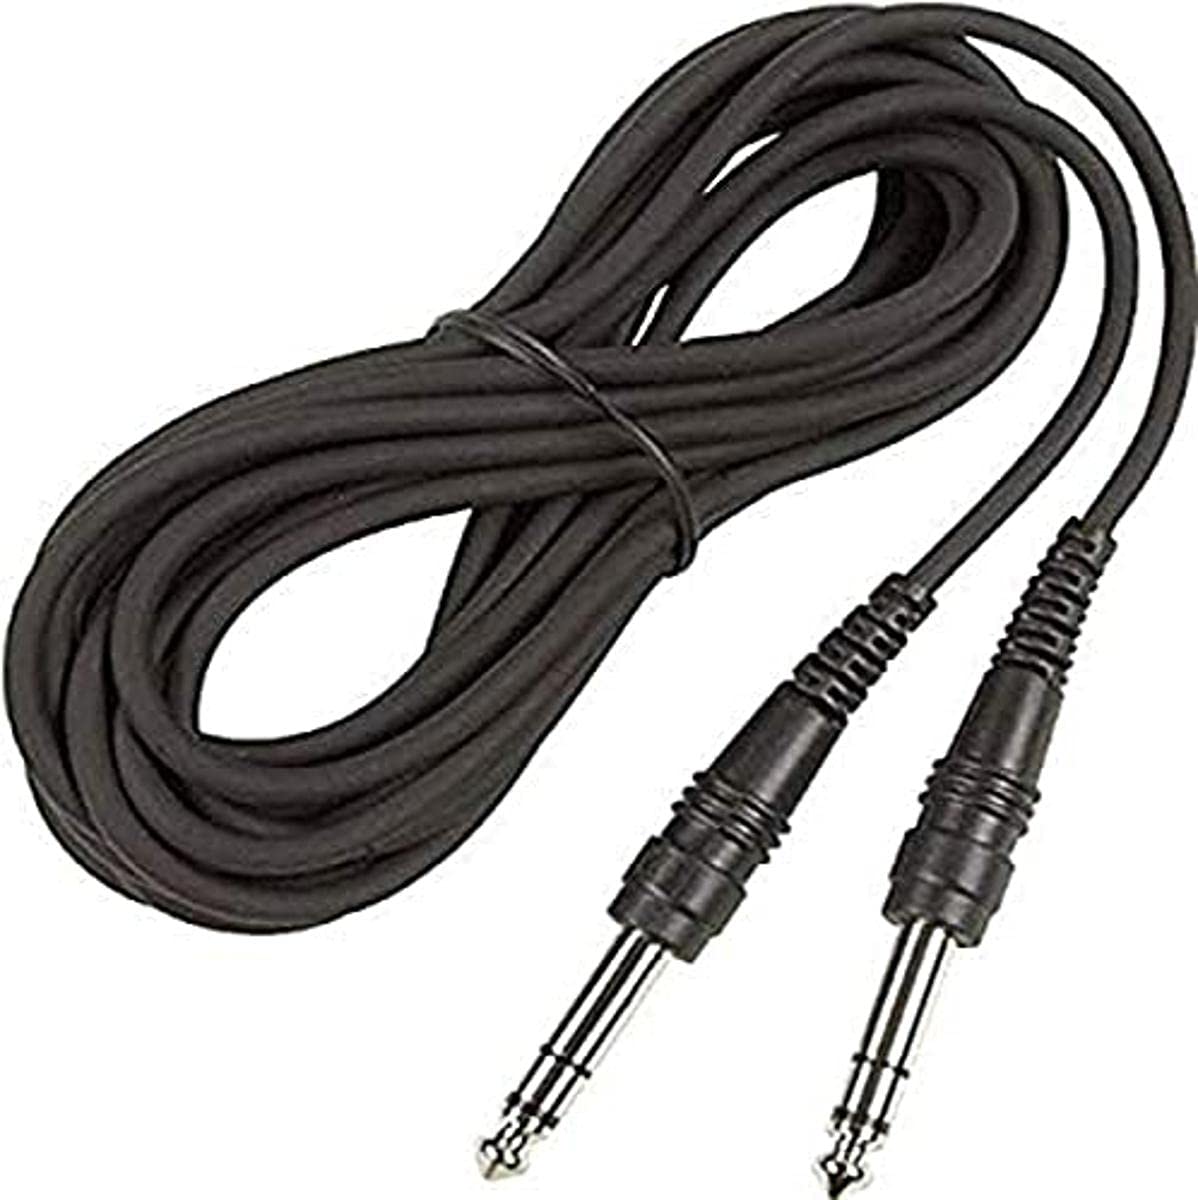 Hosa CSS-115 1/4" TRS to 1/4" TRS Balanced Interconnect Cable, 15 Feet,Black